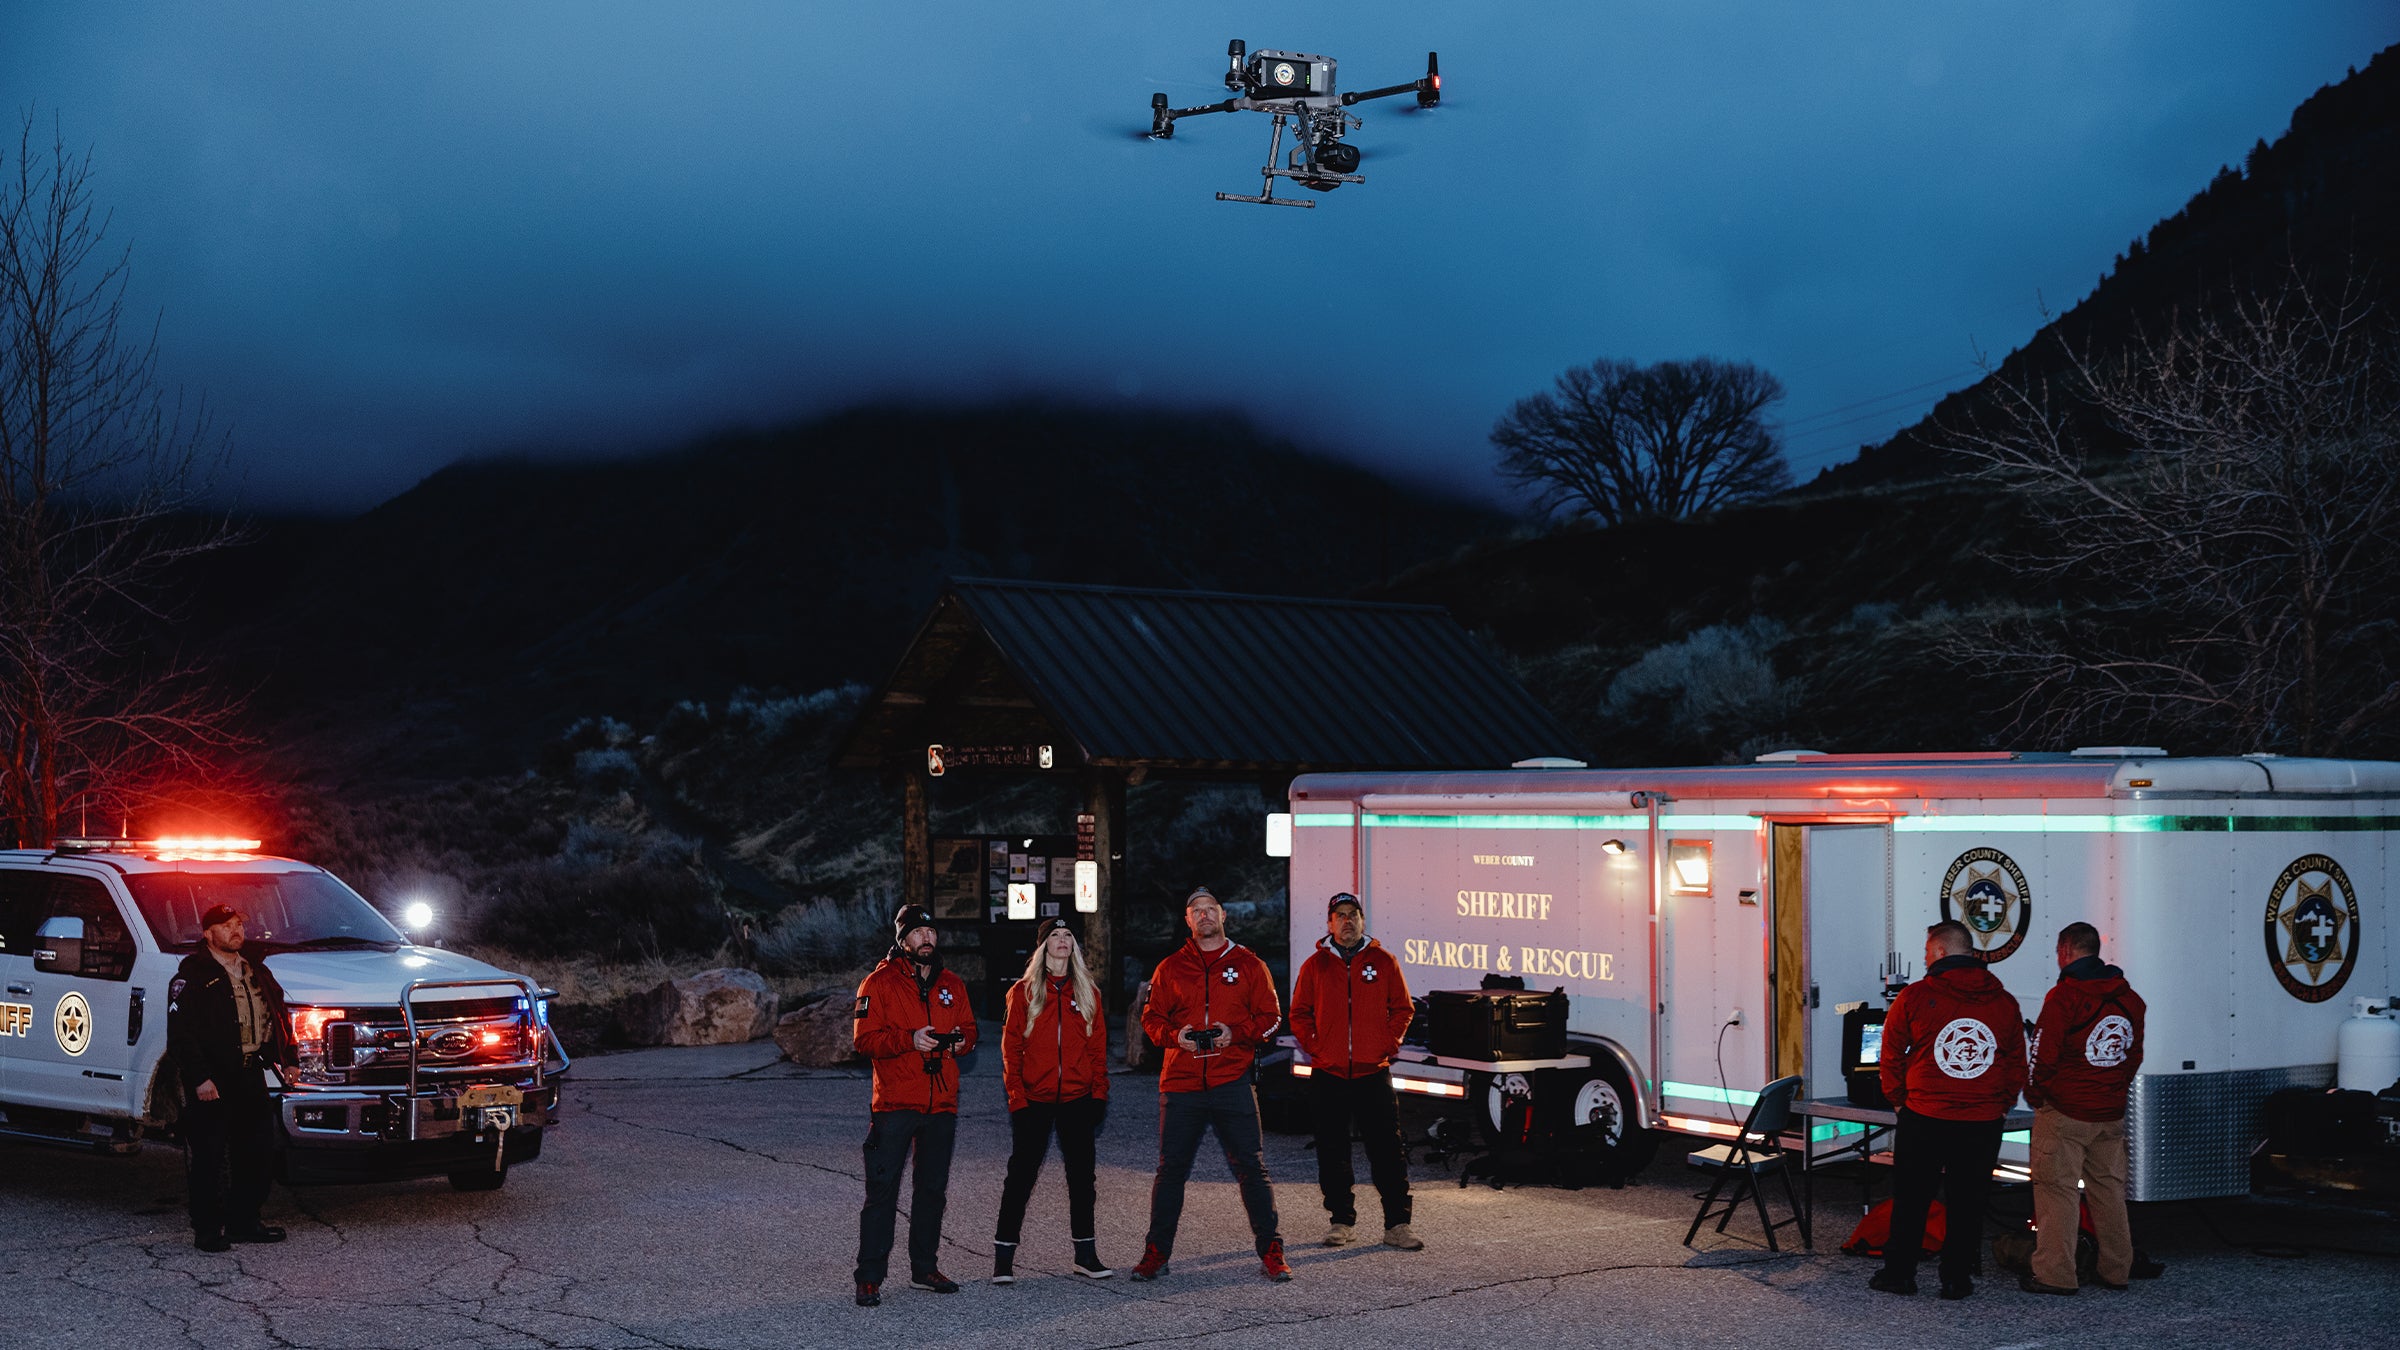 Why Drones Are the Future of Outdoor and Rescue - Outside Online